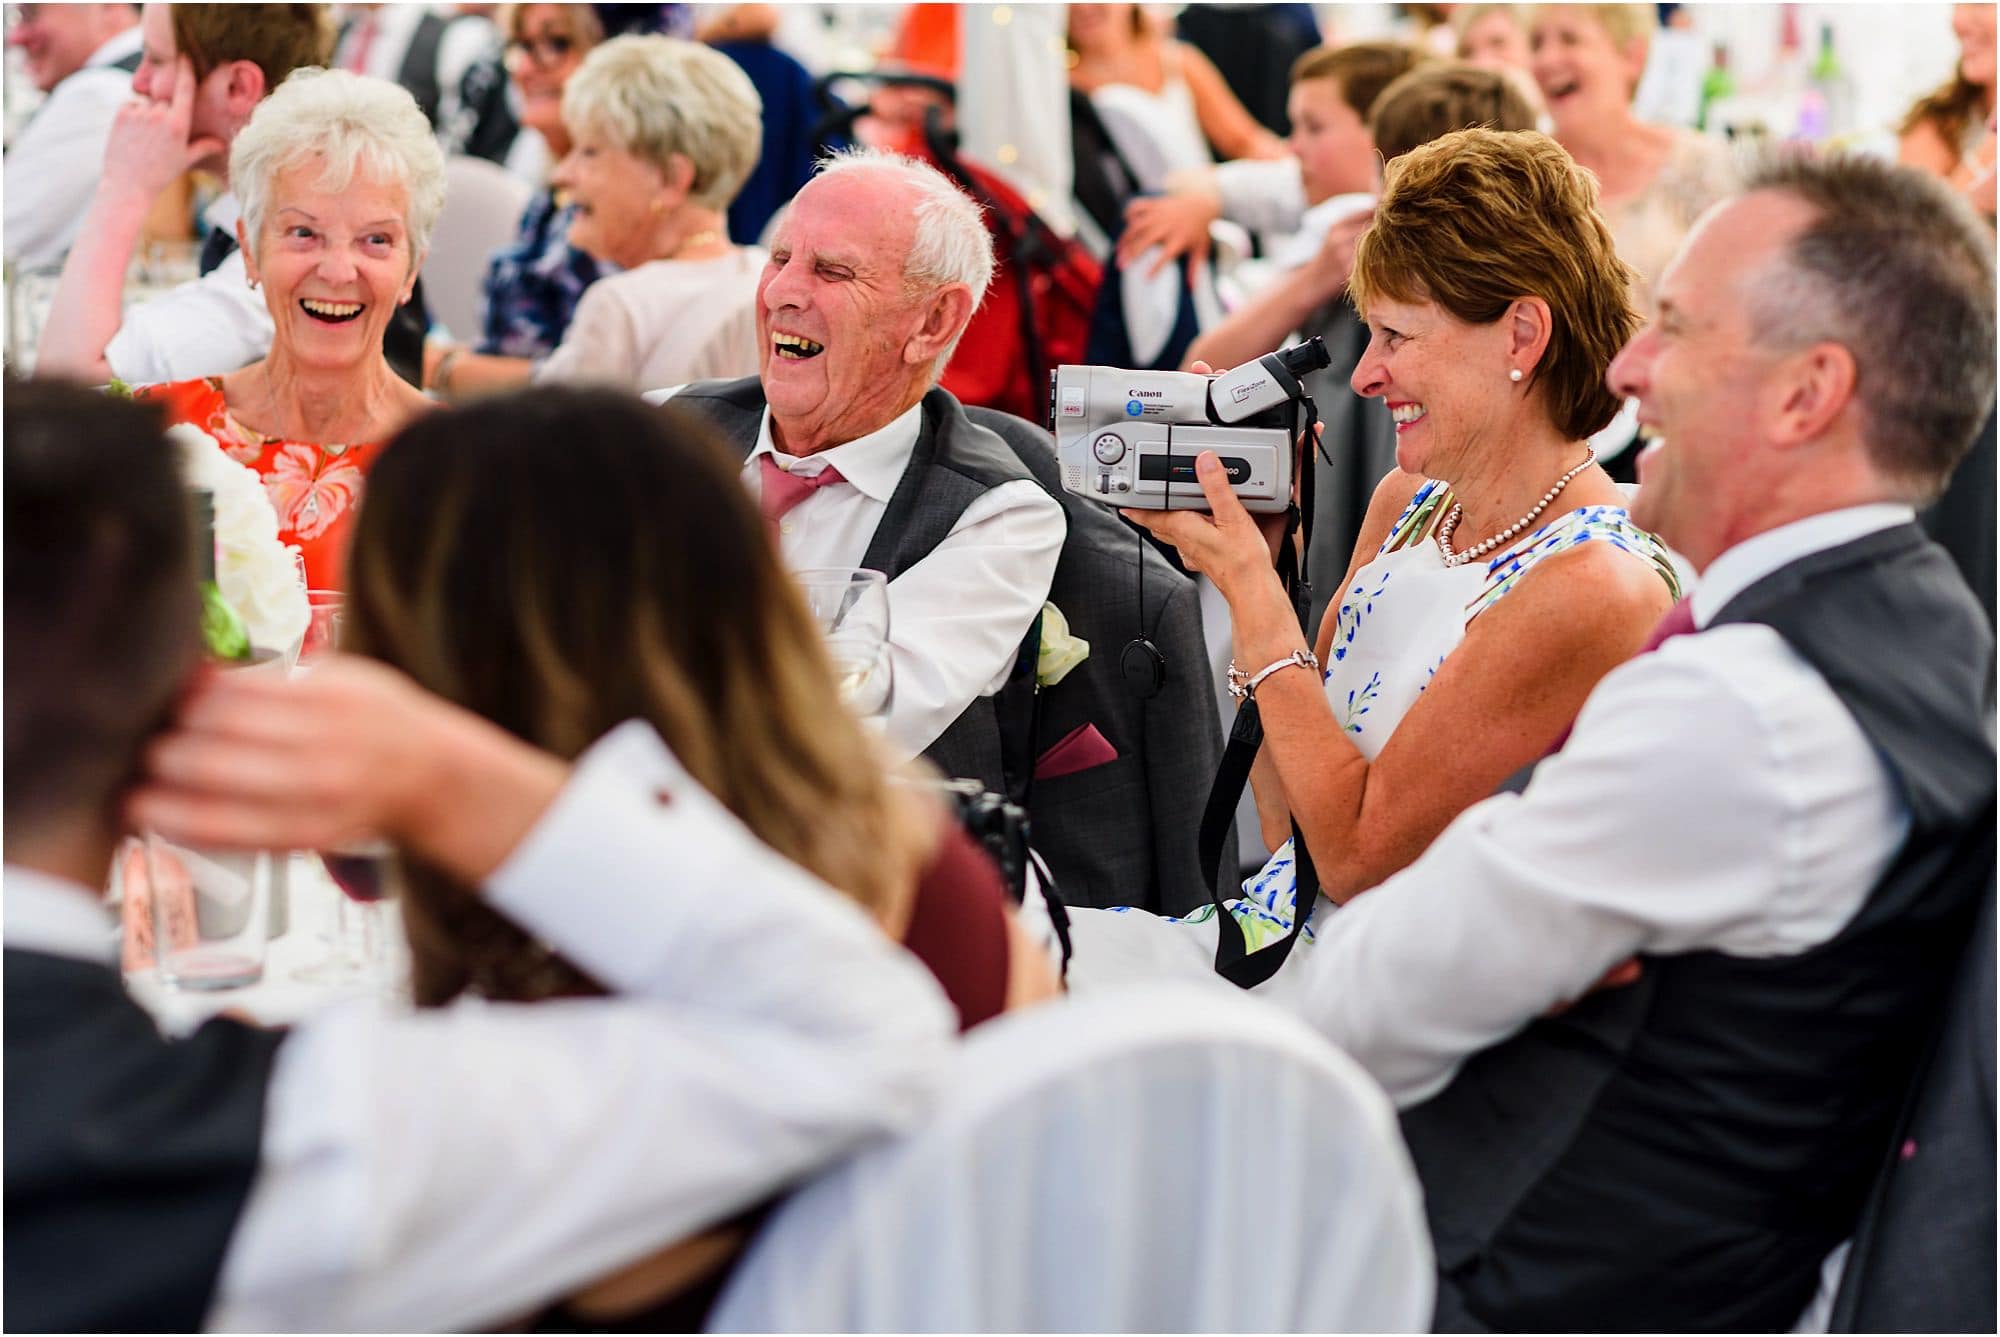 Laughter during speeches